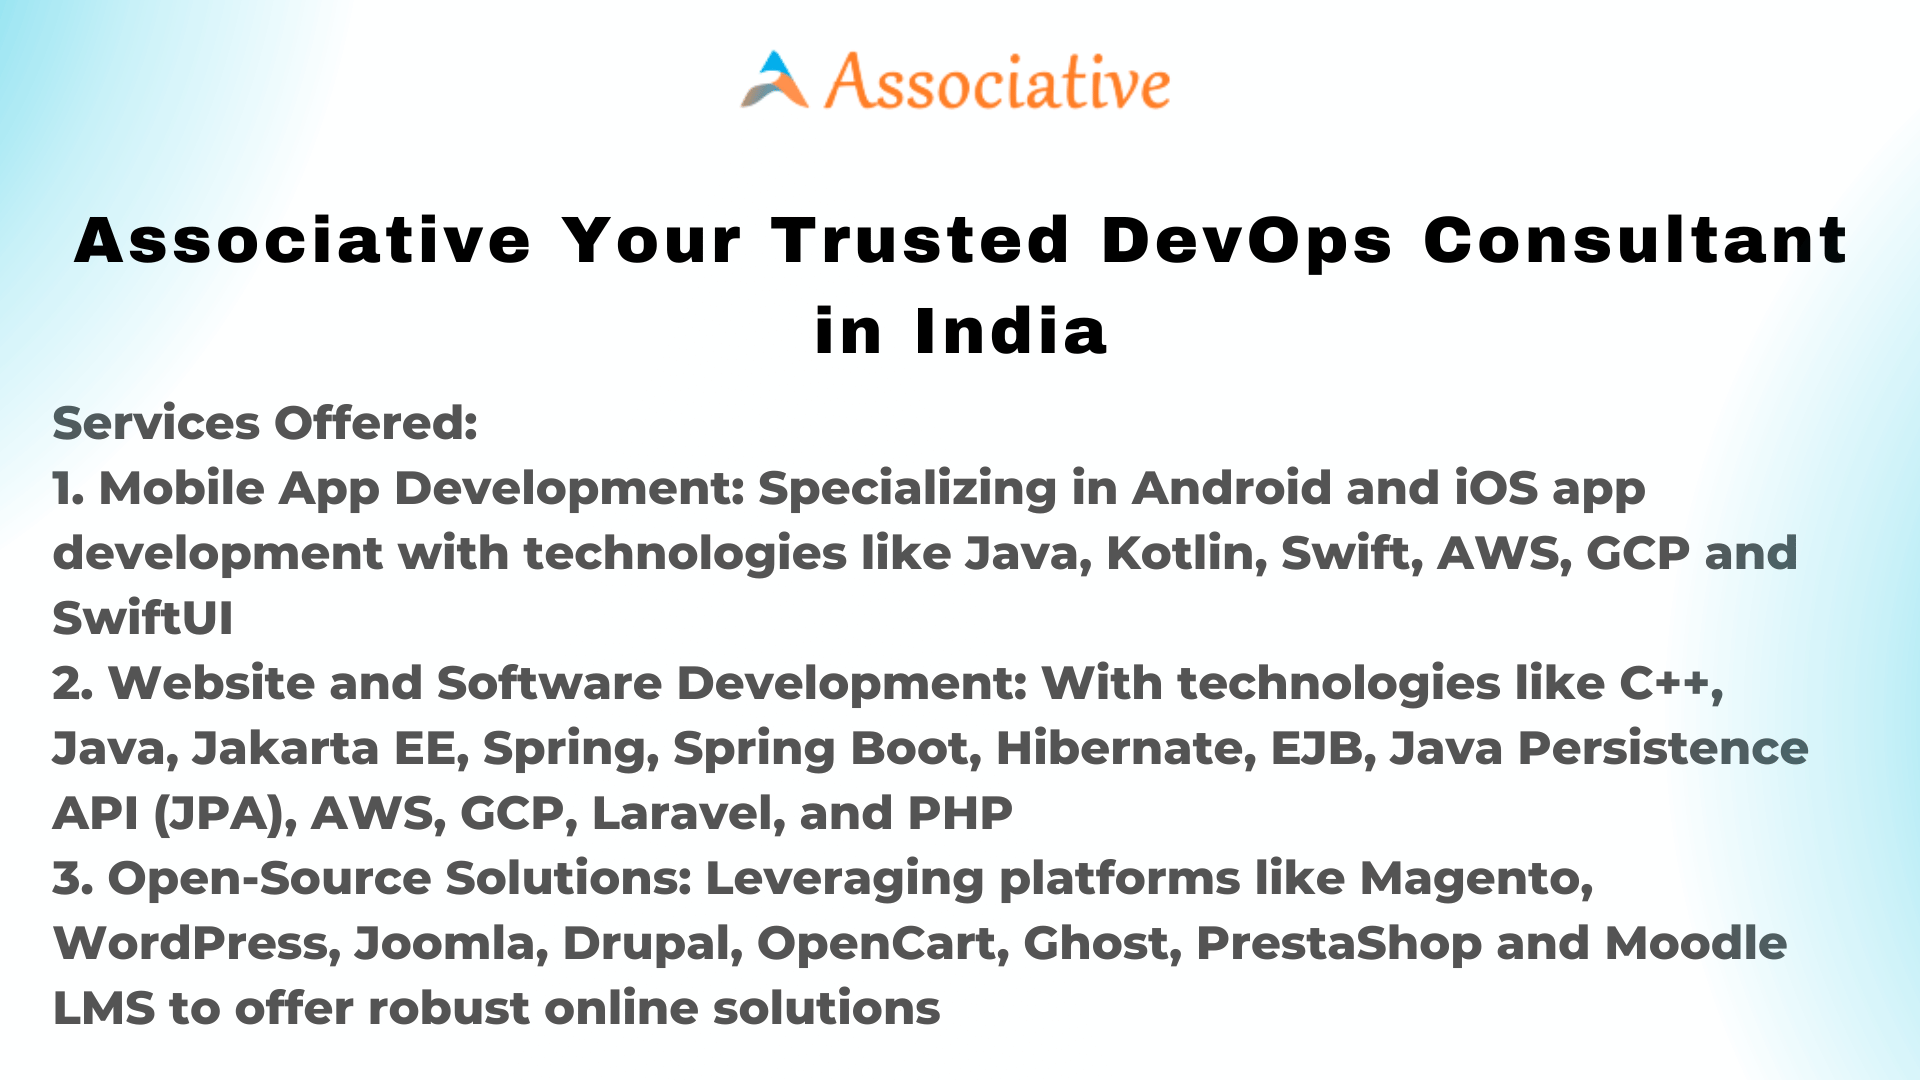 Associative Your Trusted DevOps Consultant in India